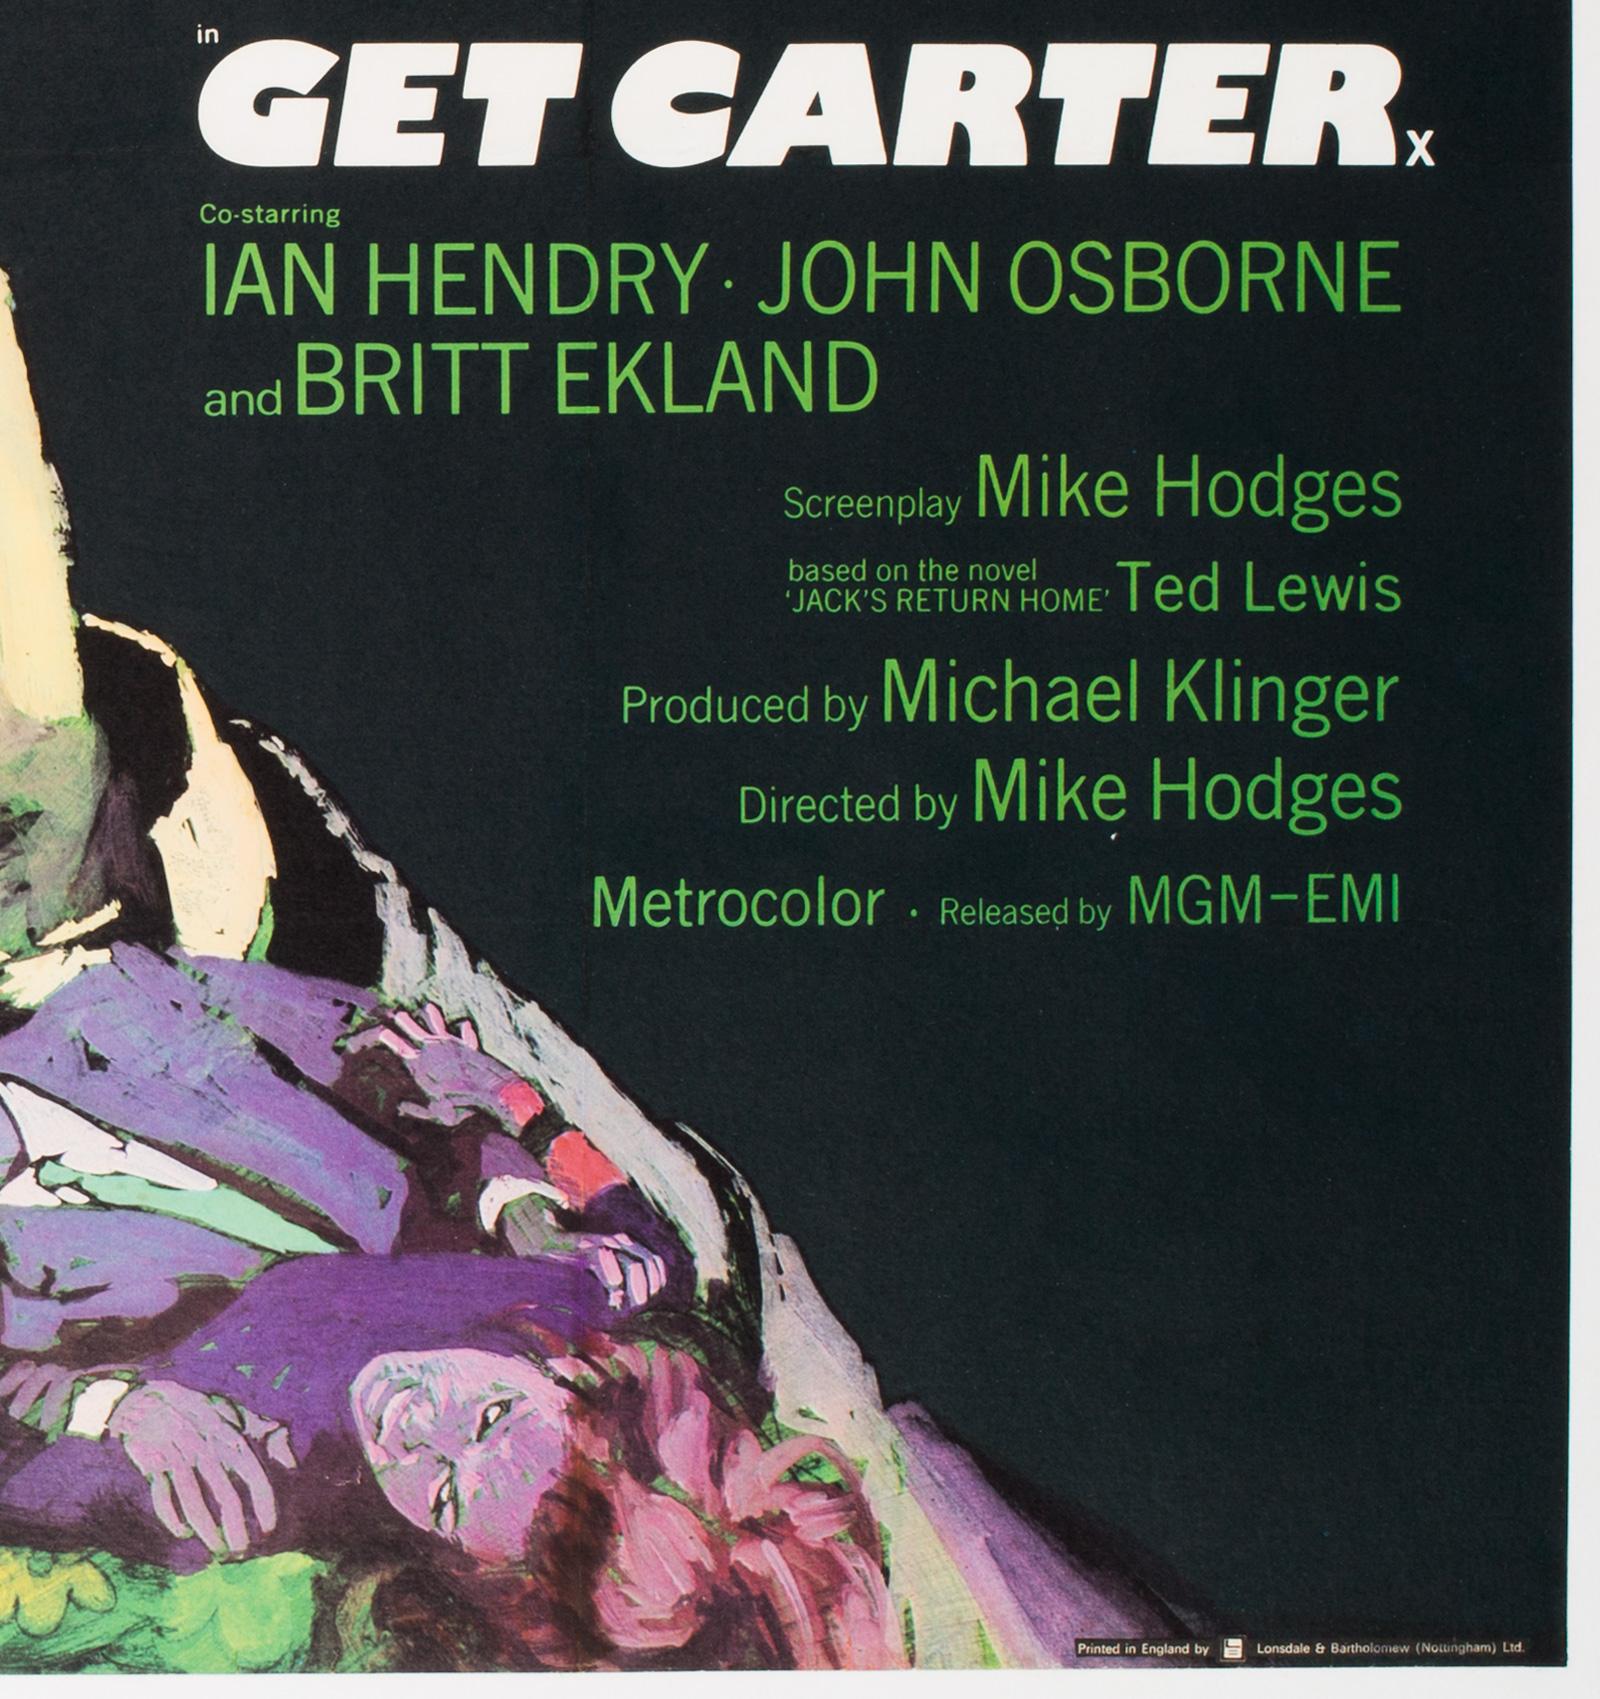 The very rare UK quad film poster for 1970s gritty Michael Caine thriller movie Get Carter. Wonderful artwork by Putzu, one of the most distinctive illustrators of his generation.

Professionally cleaned deacidified and linen backed. In Near Mint